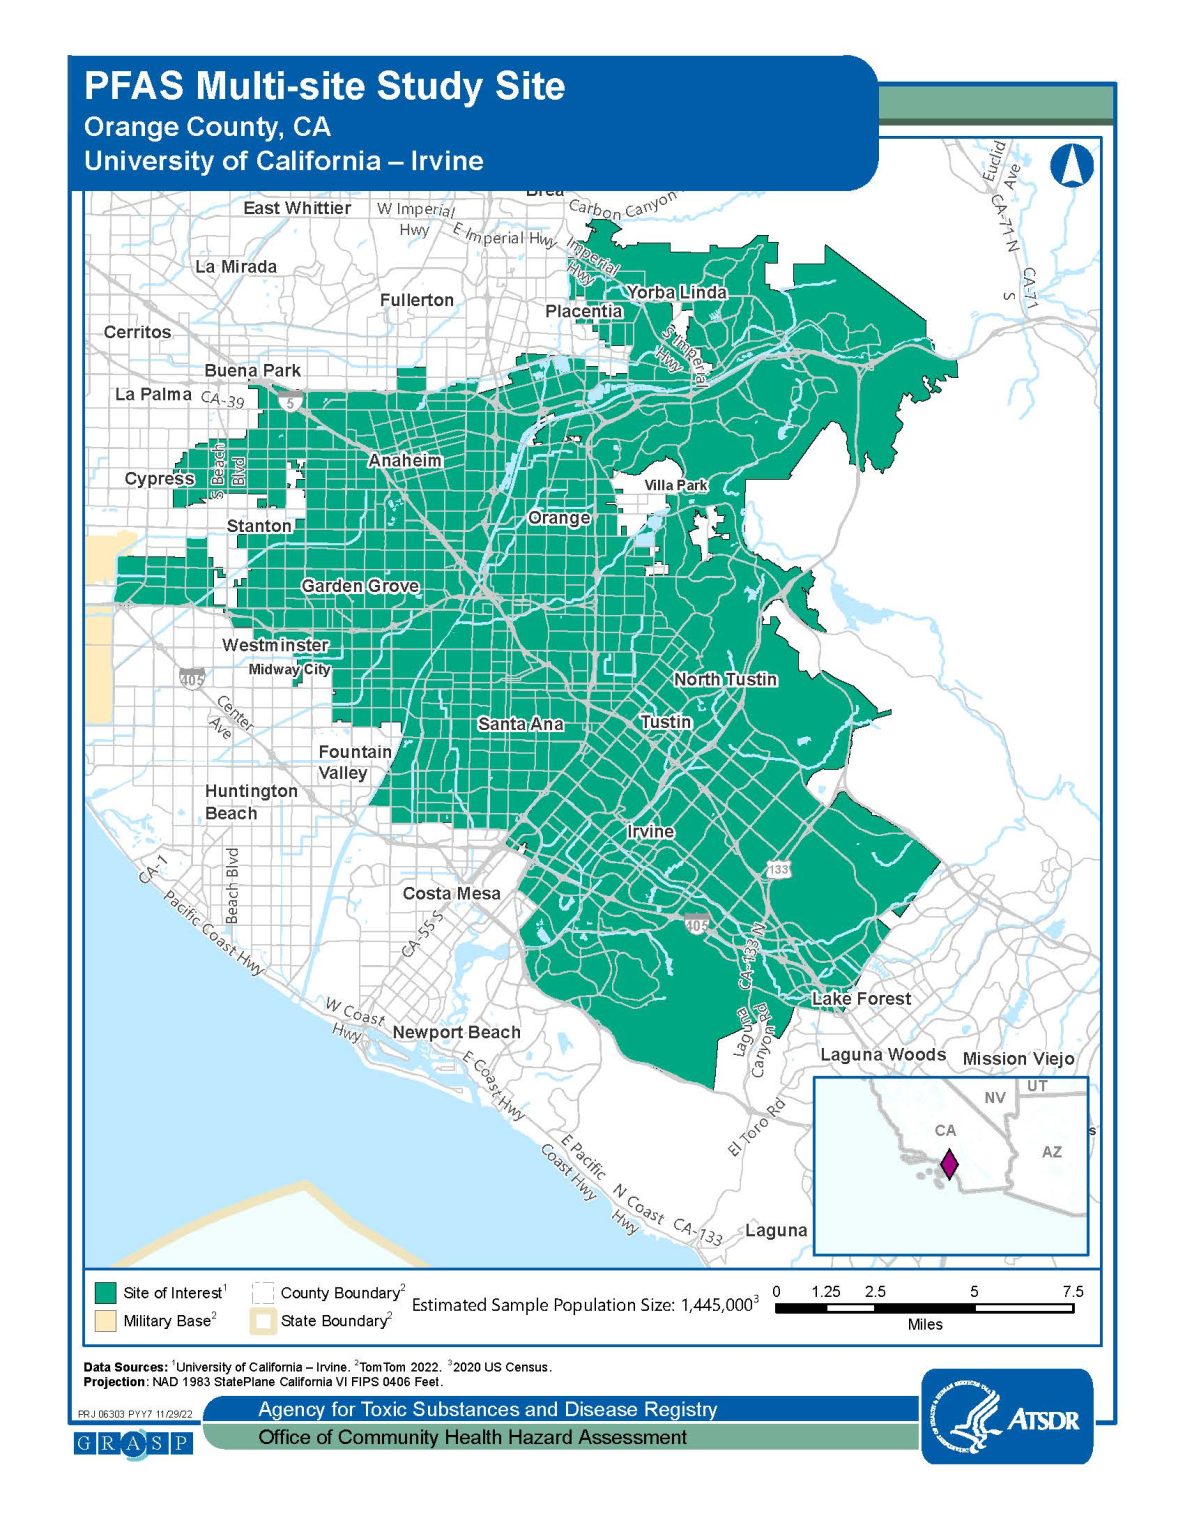 Image shows a map of Orange County, CA. The map includes a key and the estimated sample population size is 1,445,000